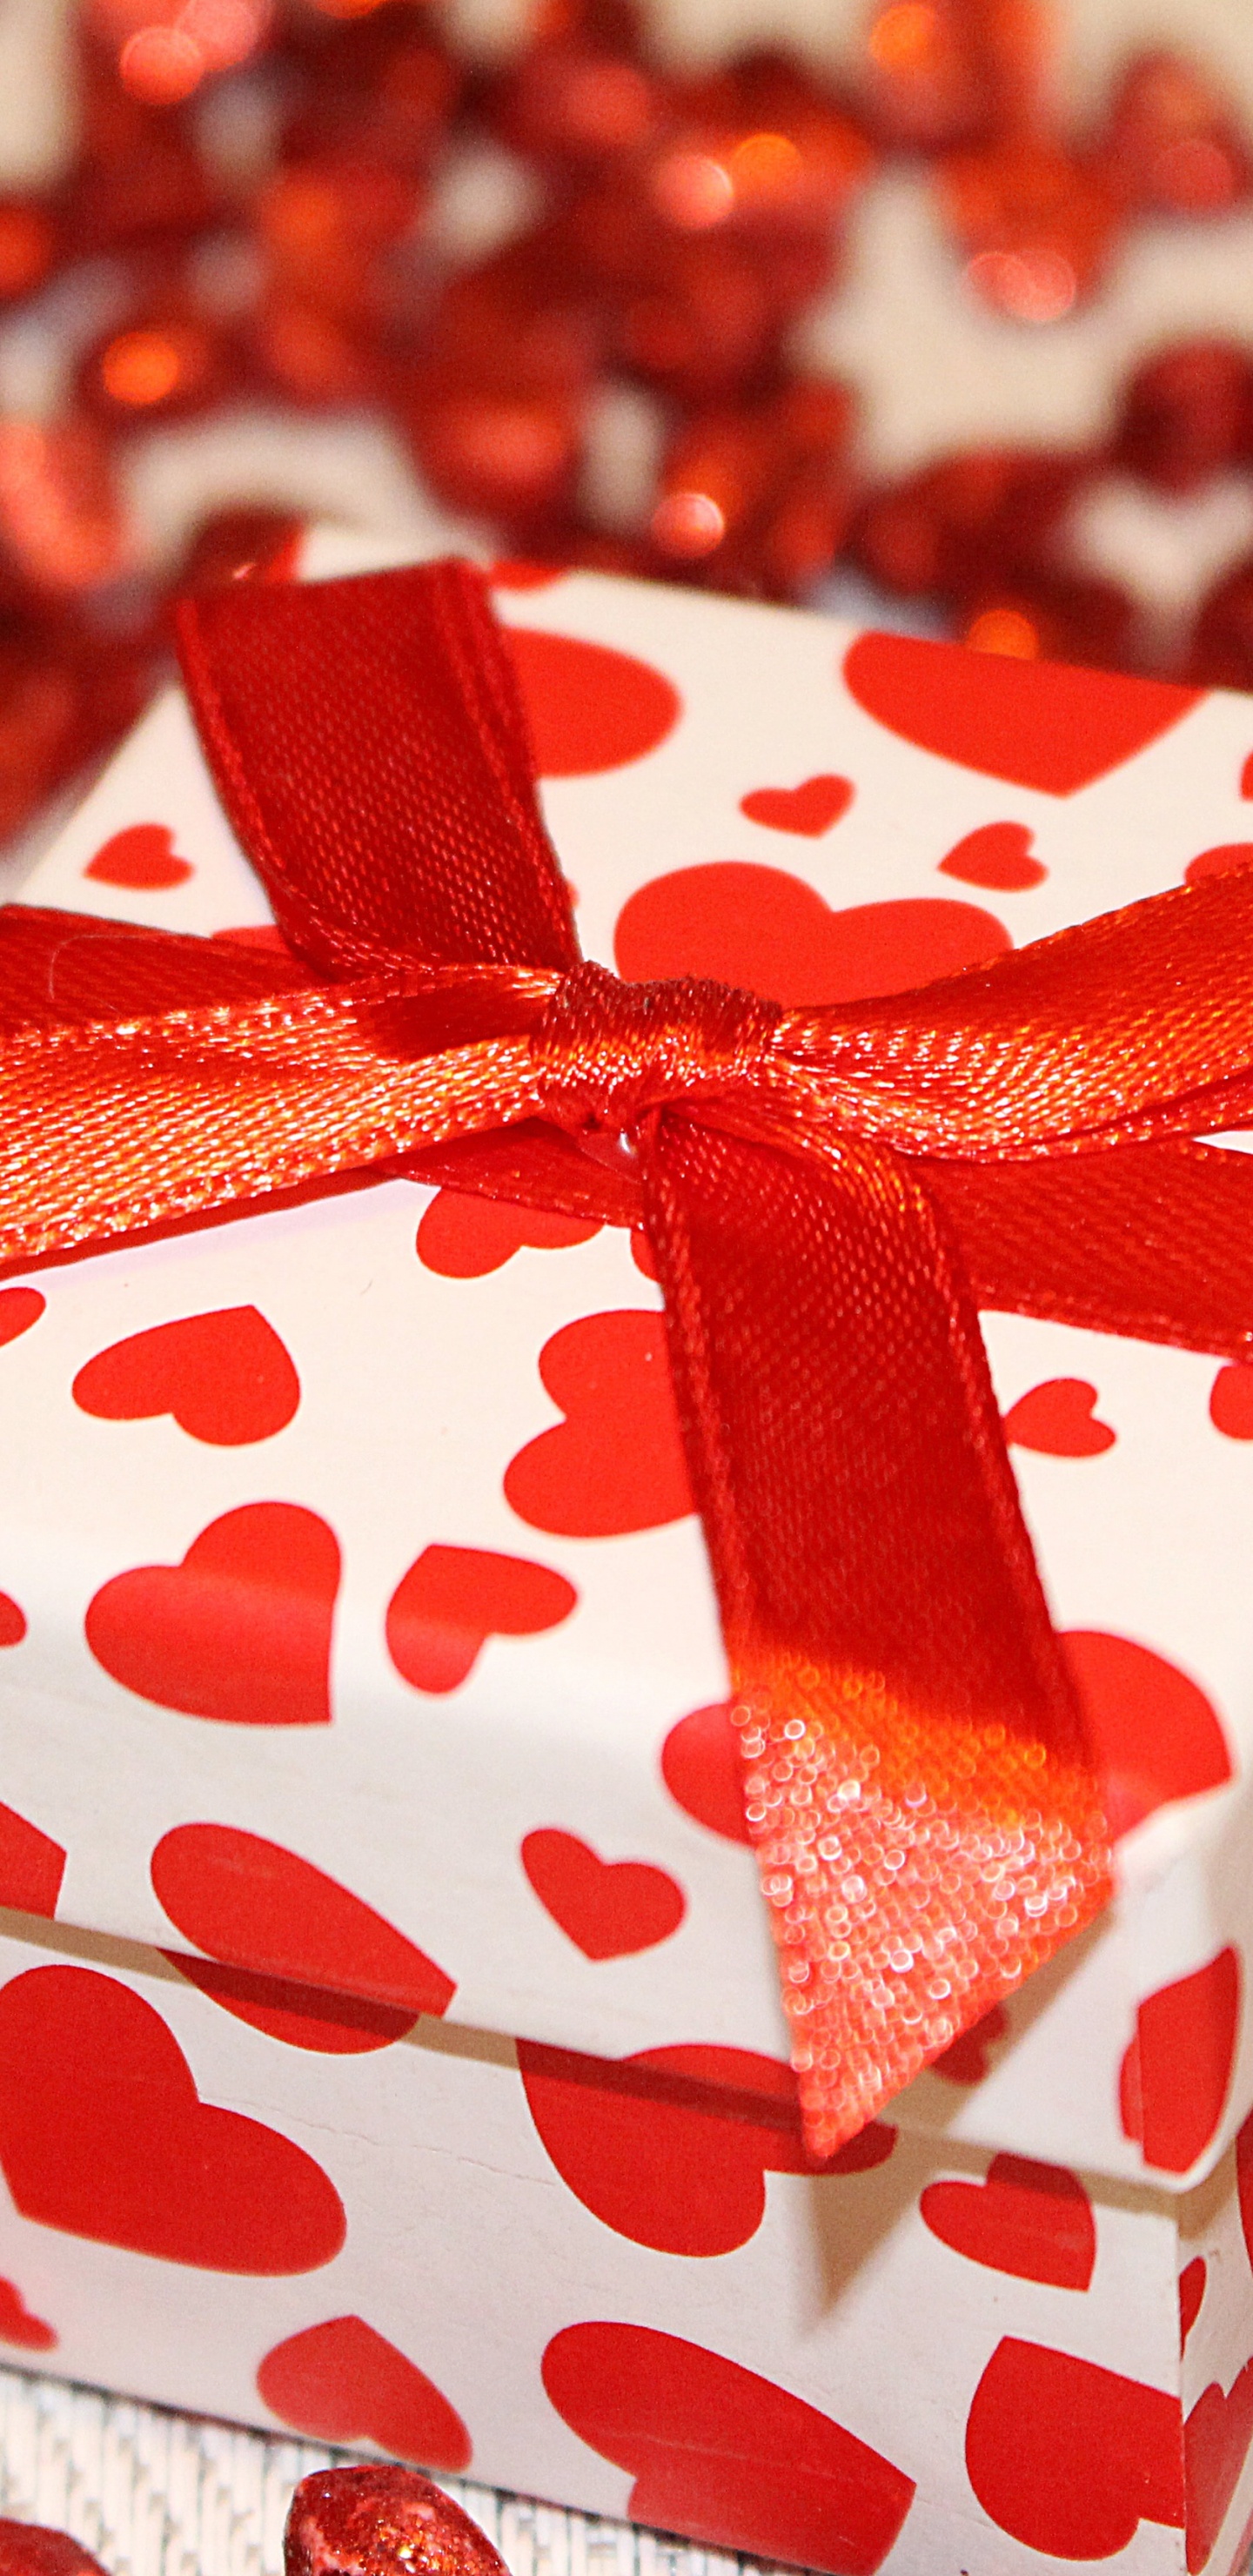 Gift, Valentines Day, Gift Wrapping, Red, Food. Wallpaper in 1440x2960 Resolution